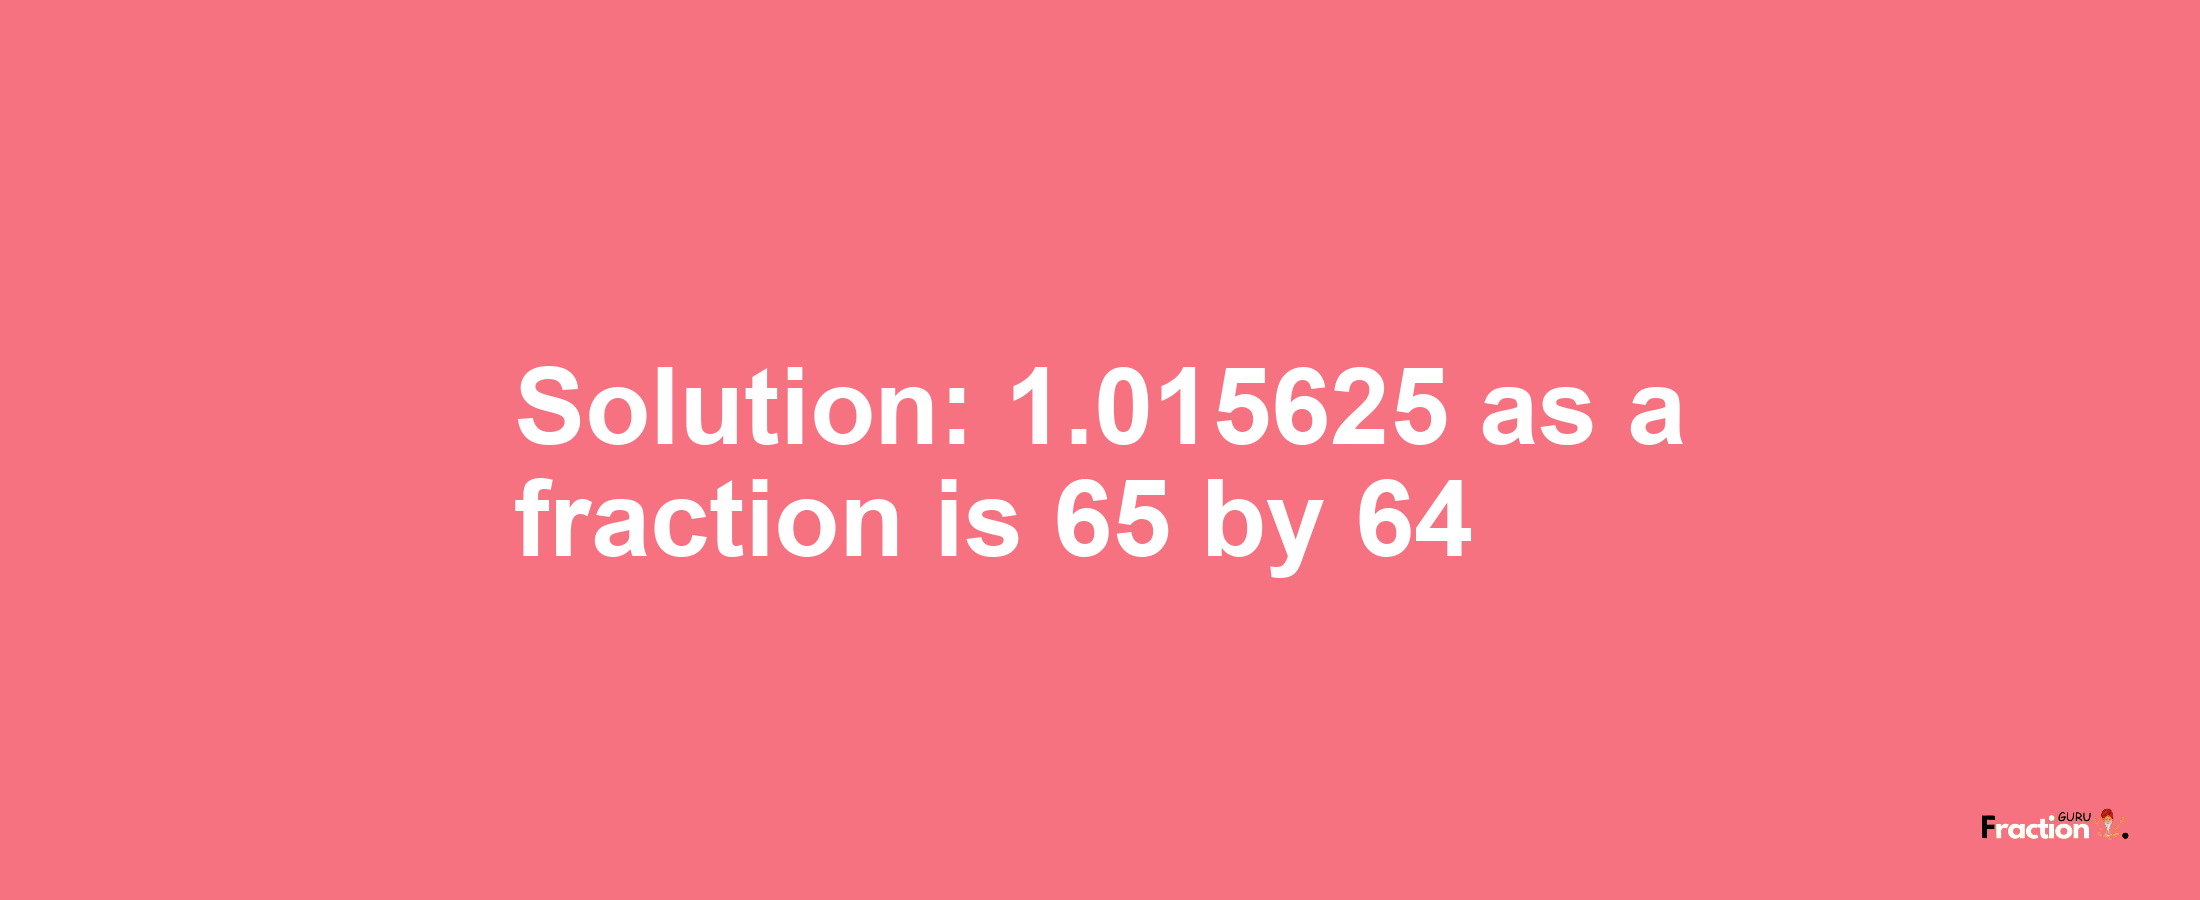 Solution:1.015625 as a fraction is 65/64